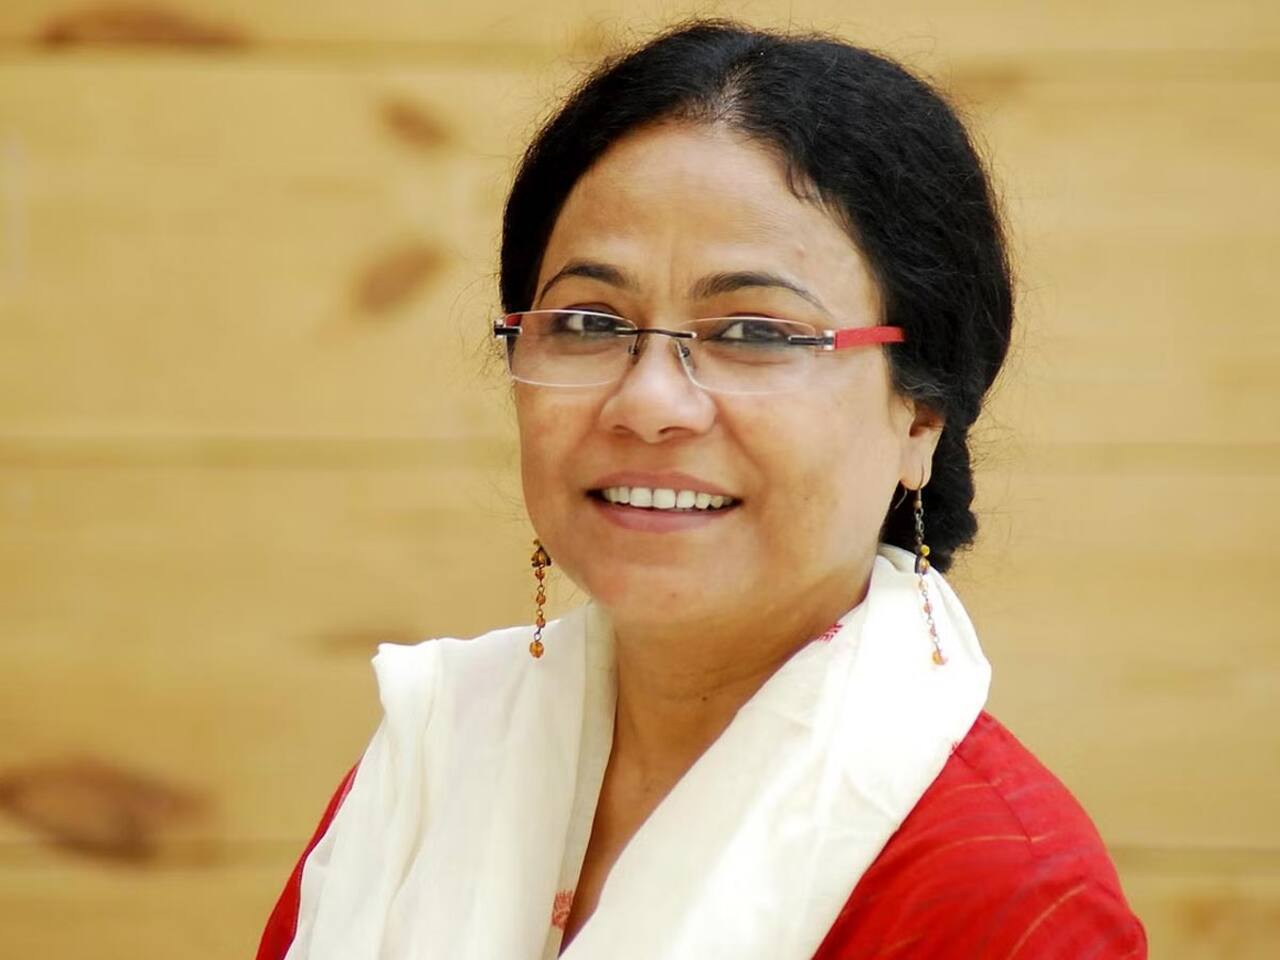 Seema Biswas warns fans against copying celebrity lifestyle: ‘It can lead to debt, stress, and compromised future'